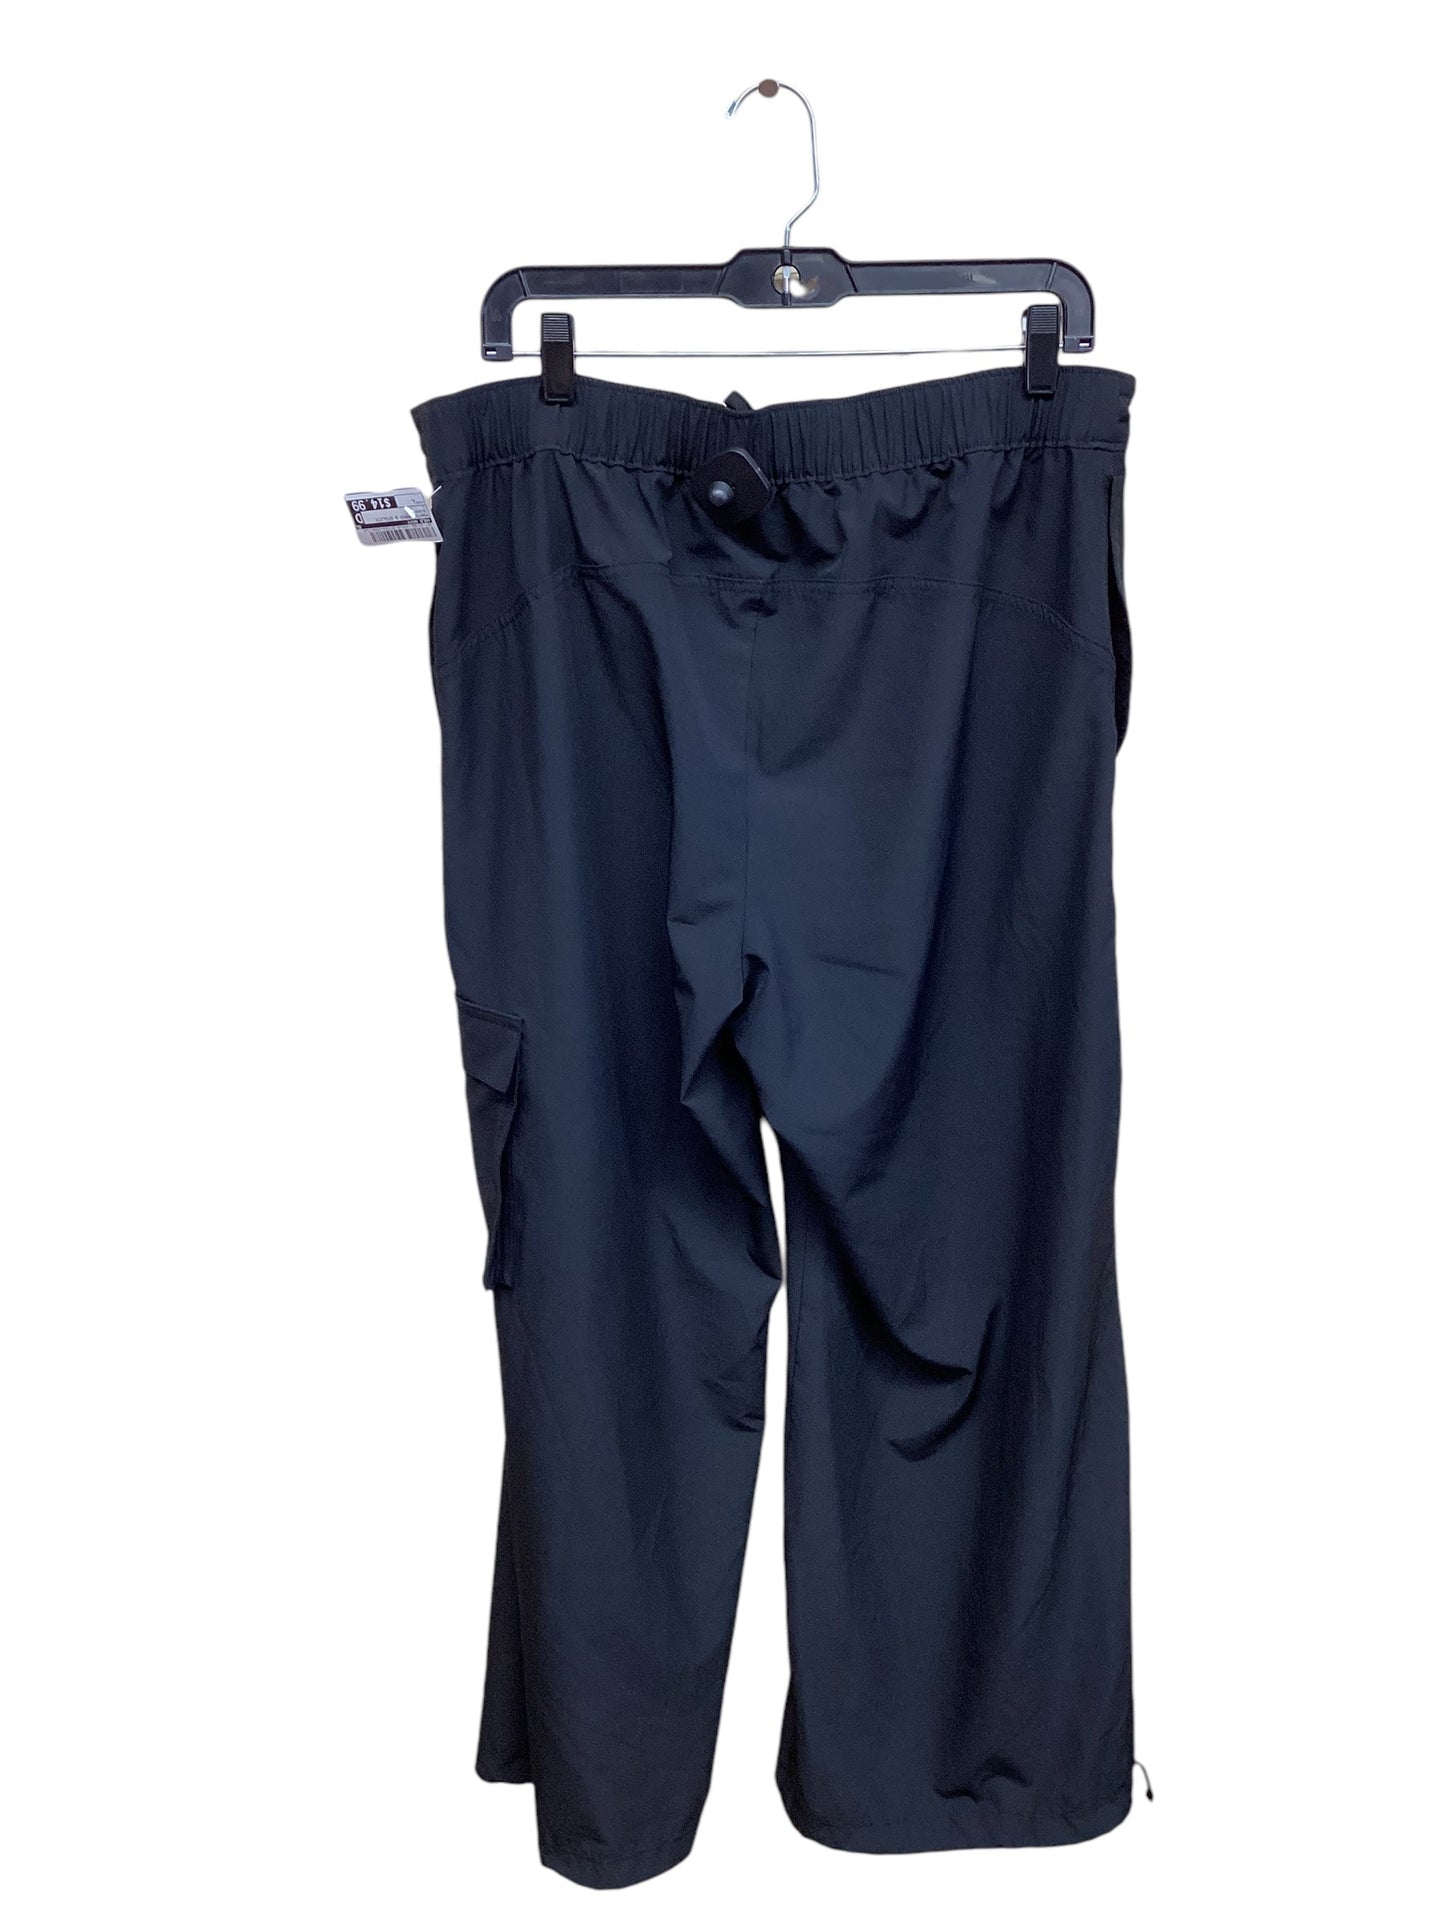 Pants Cargo & Utility By Old Navy  Size: L